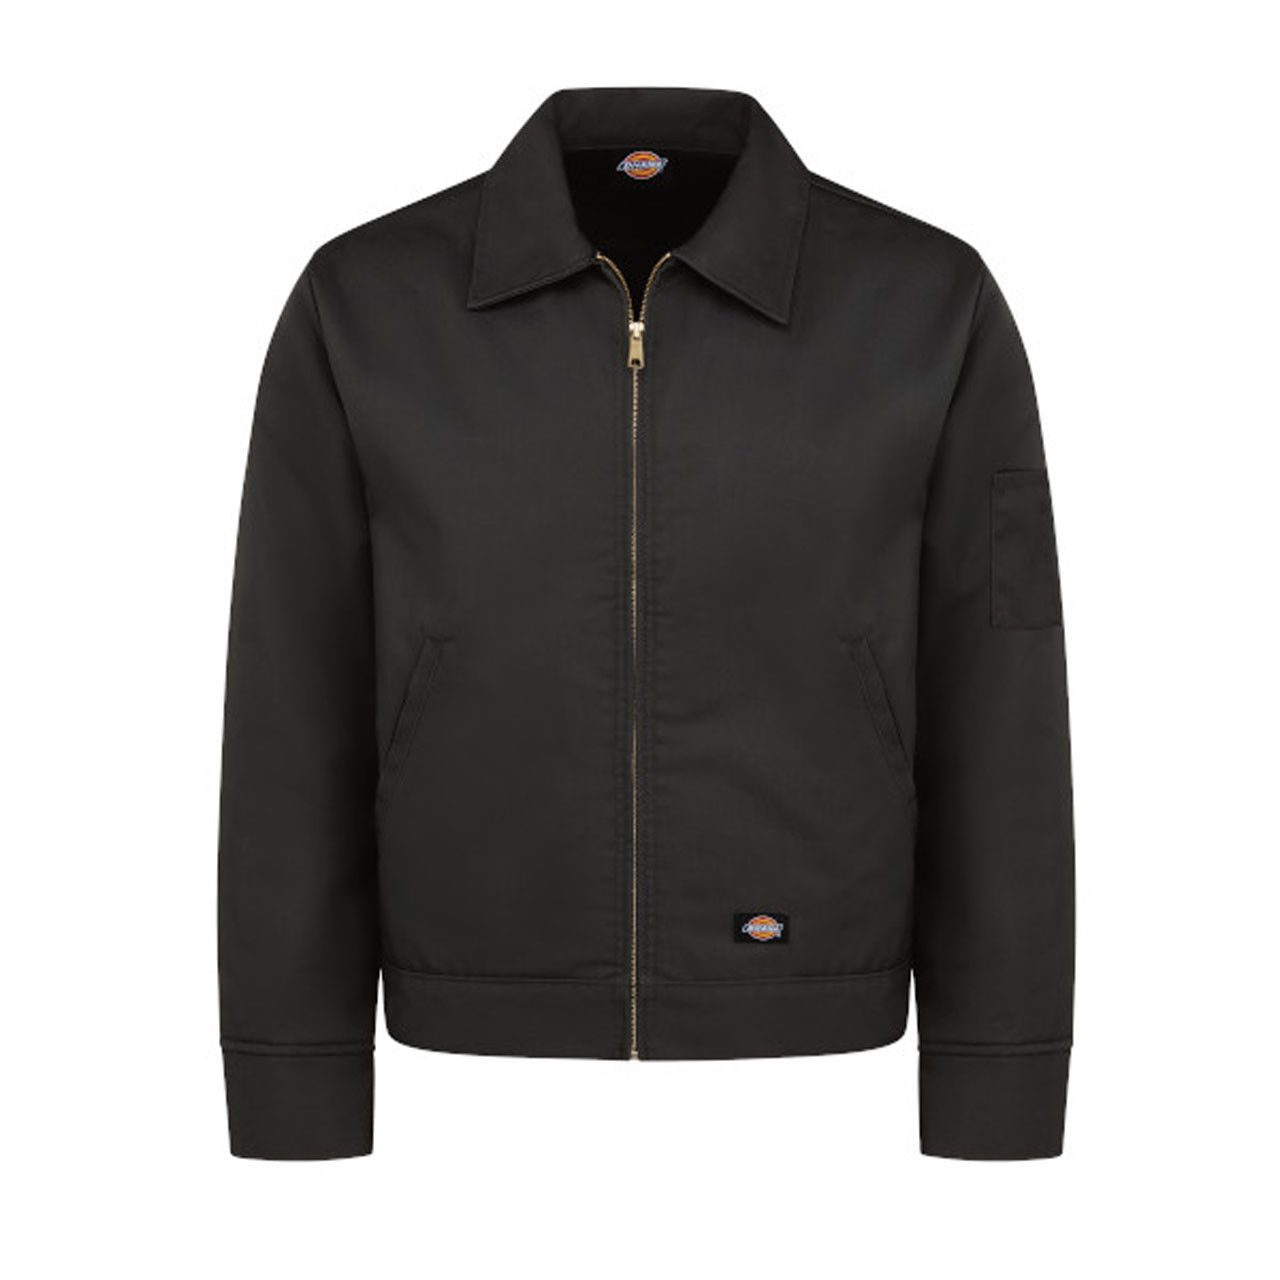 What notable features does the black Dickies jacket TJ55 offer?